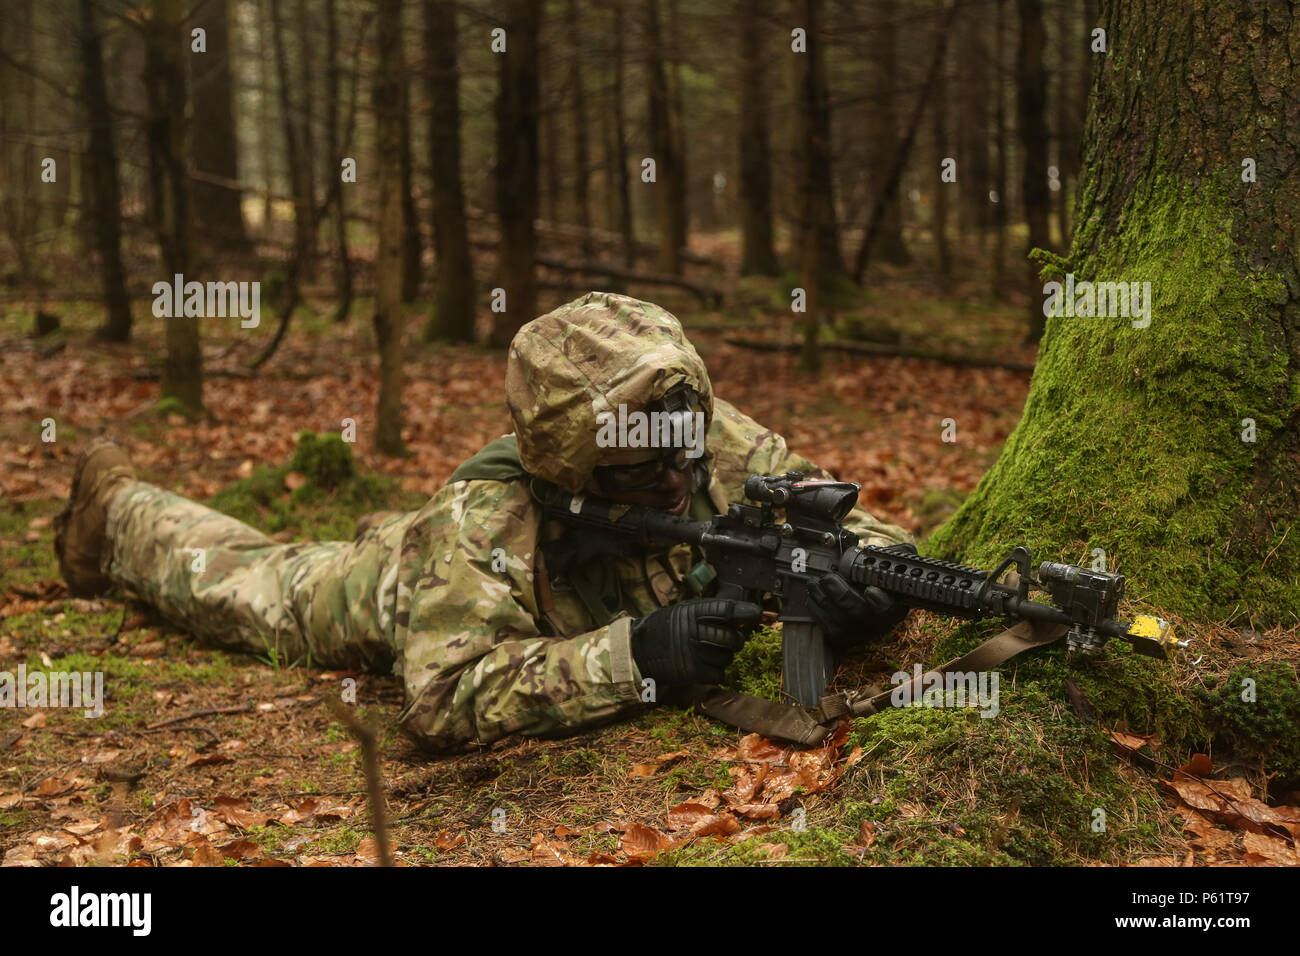 A U.S. Soldier of 1st Squadron, 91st Cavalry Regiment, 173rd Airborne Brigade provides security as part of a react to contact scenario during exercise Saber Junction 16 at the U.S. Army’s Joint Multinational Readiness Center (JMRC) in Hohenfels, Germany, April 15, 2016. Saber Junction 16 is the U.S. Army Europe’s 173rd Airborne Brigade’s combat training center certification exercise, taking place at the JMRC in Hohenfels, Germany, Mar. 31-Apr. 24, 2016.  The exercise is designed to evaluate the readiness of the Army’s Europe-based combat brigades to conduct unified land operations and promote  Stock Photo